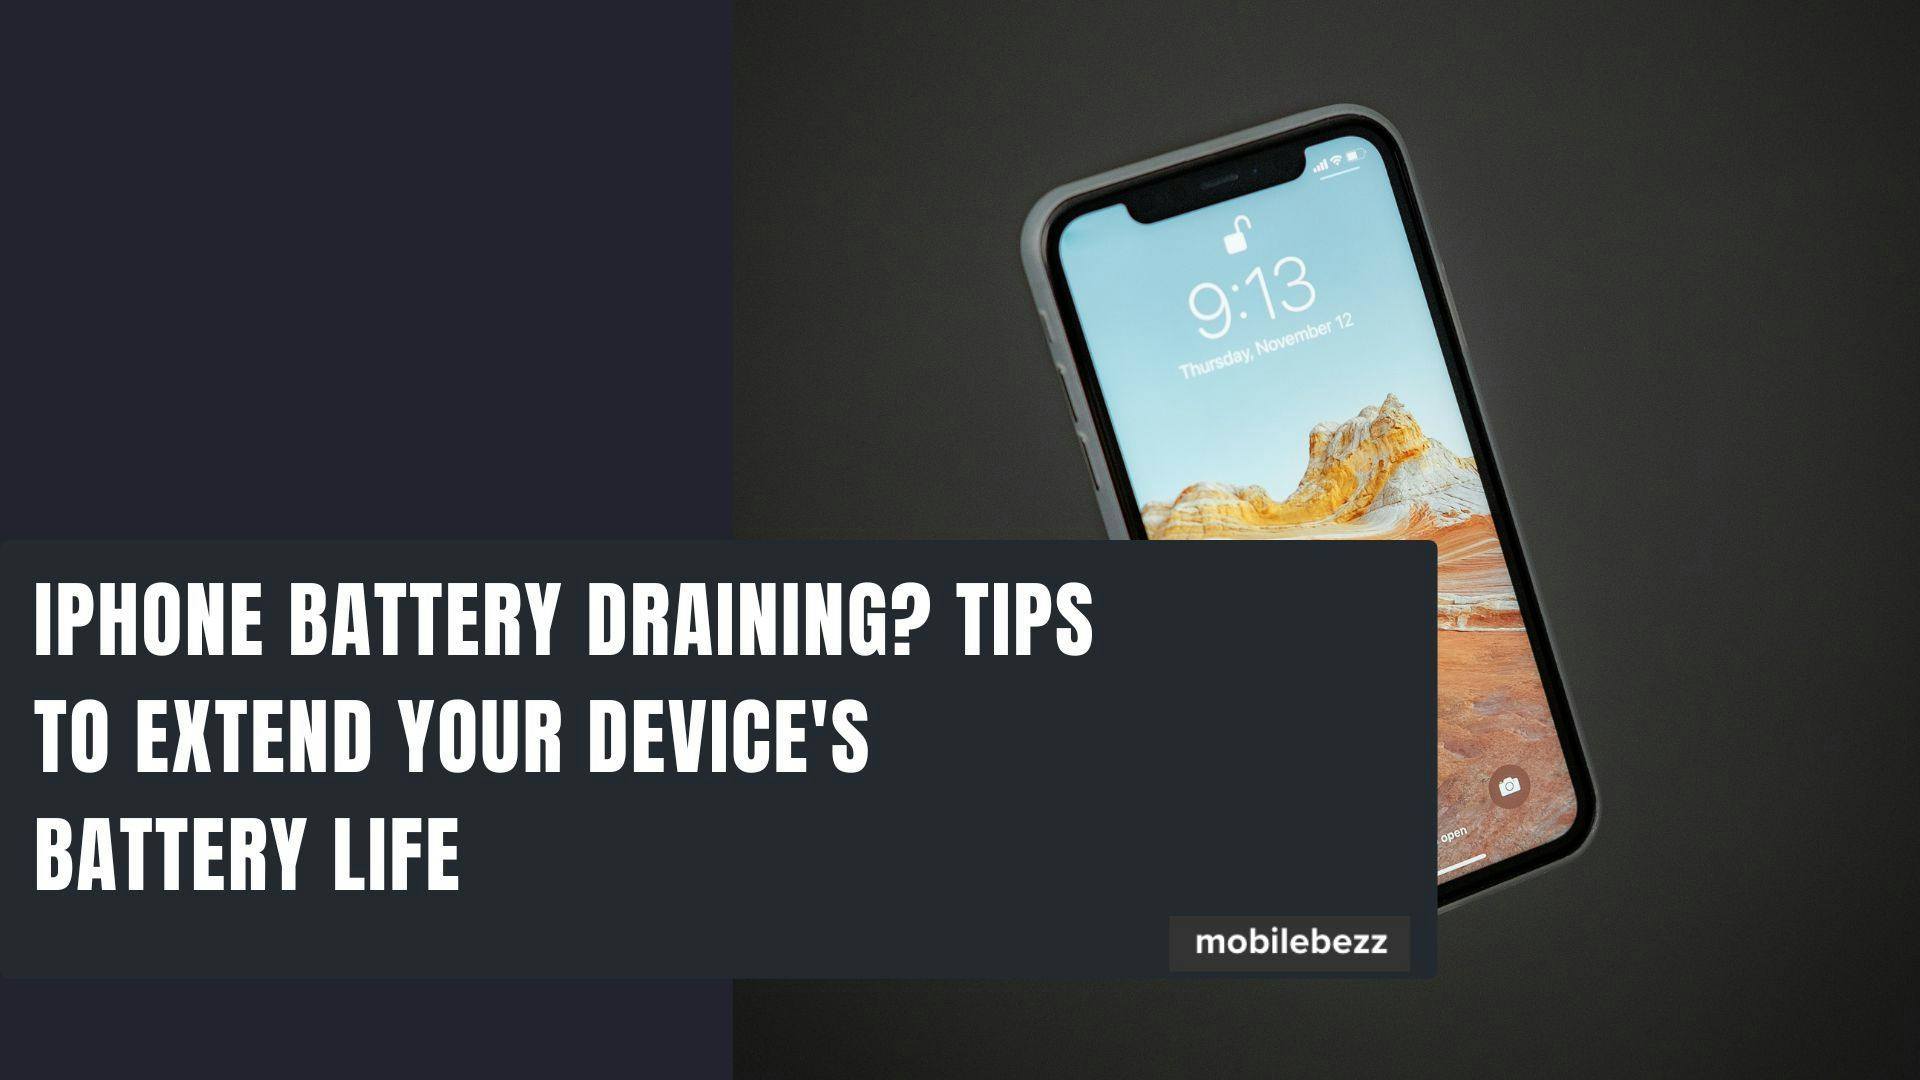 iPhone Battery Draining? Tips to Extend Your Device's Battery Life featured image 